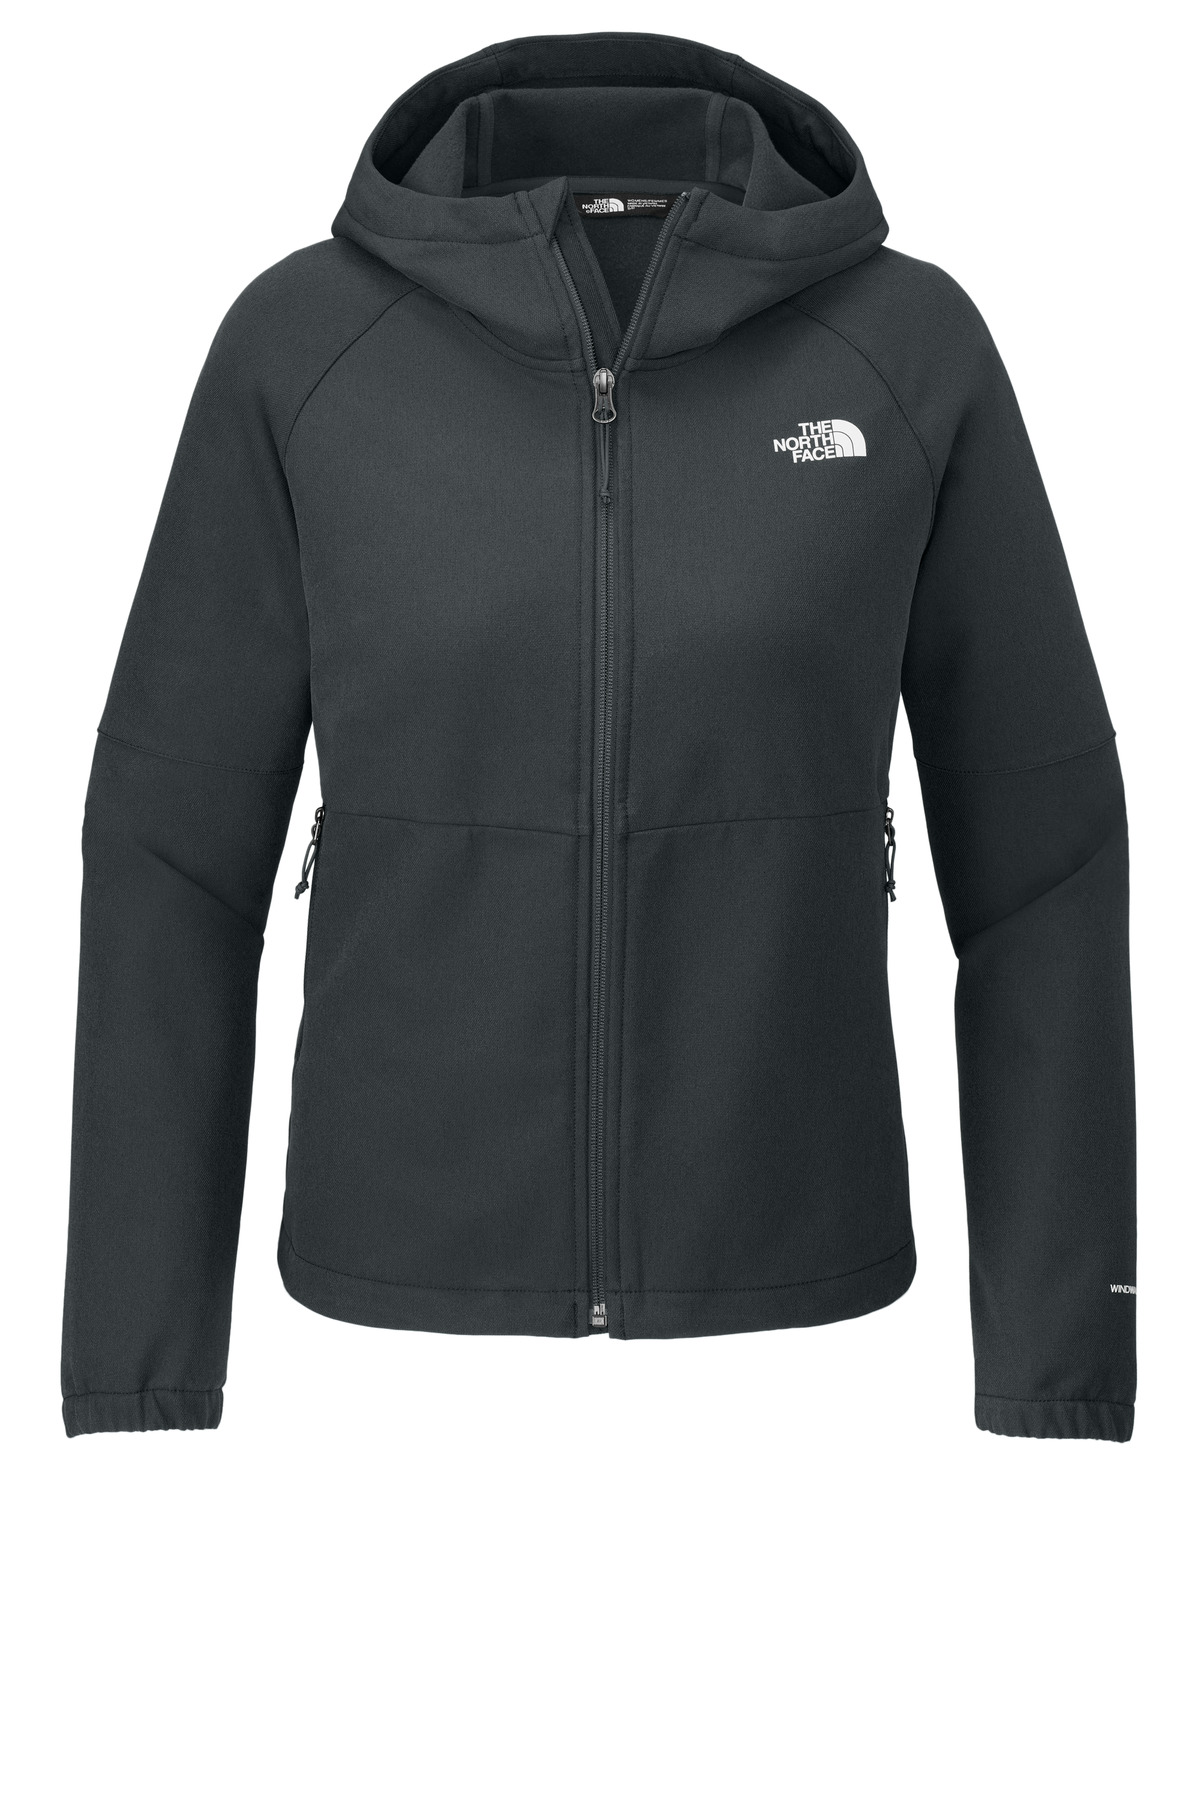 The North Face Ladies Barr Lake Hooded Soft Shell Jacket-